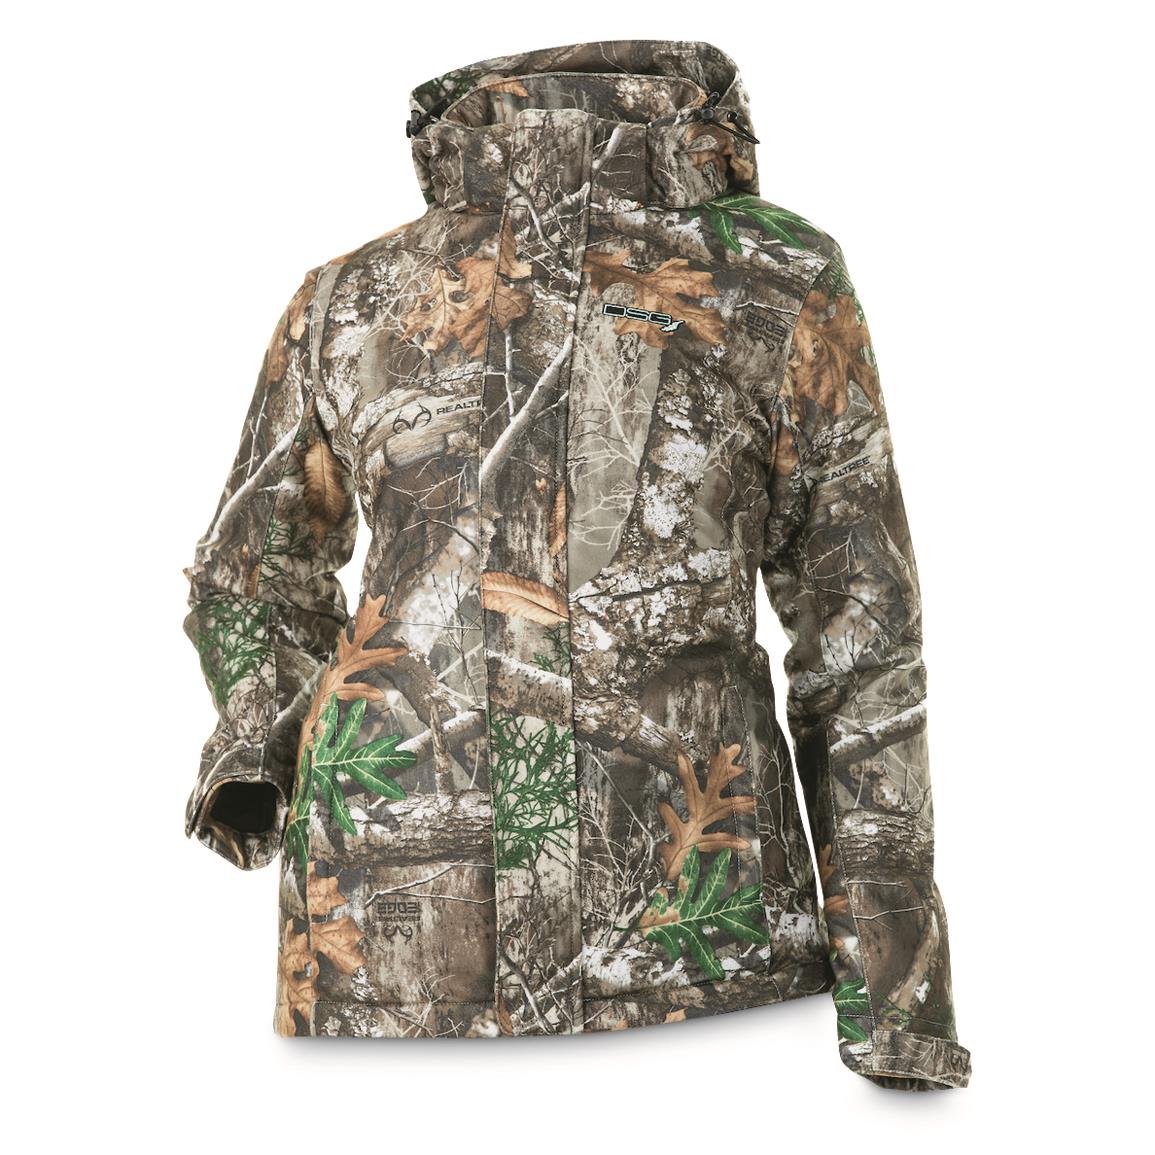 DSG Outerwear Women's Addie Hunting Jacket, Realtree Edge Camo